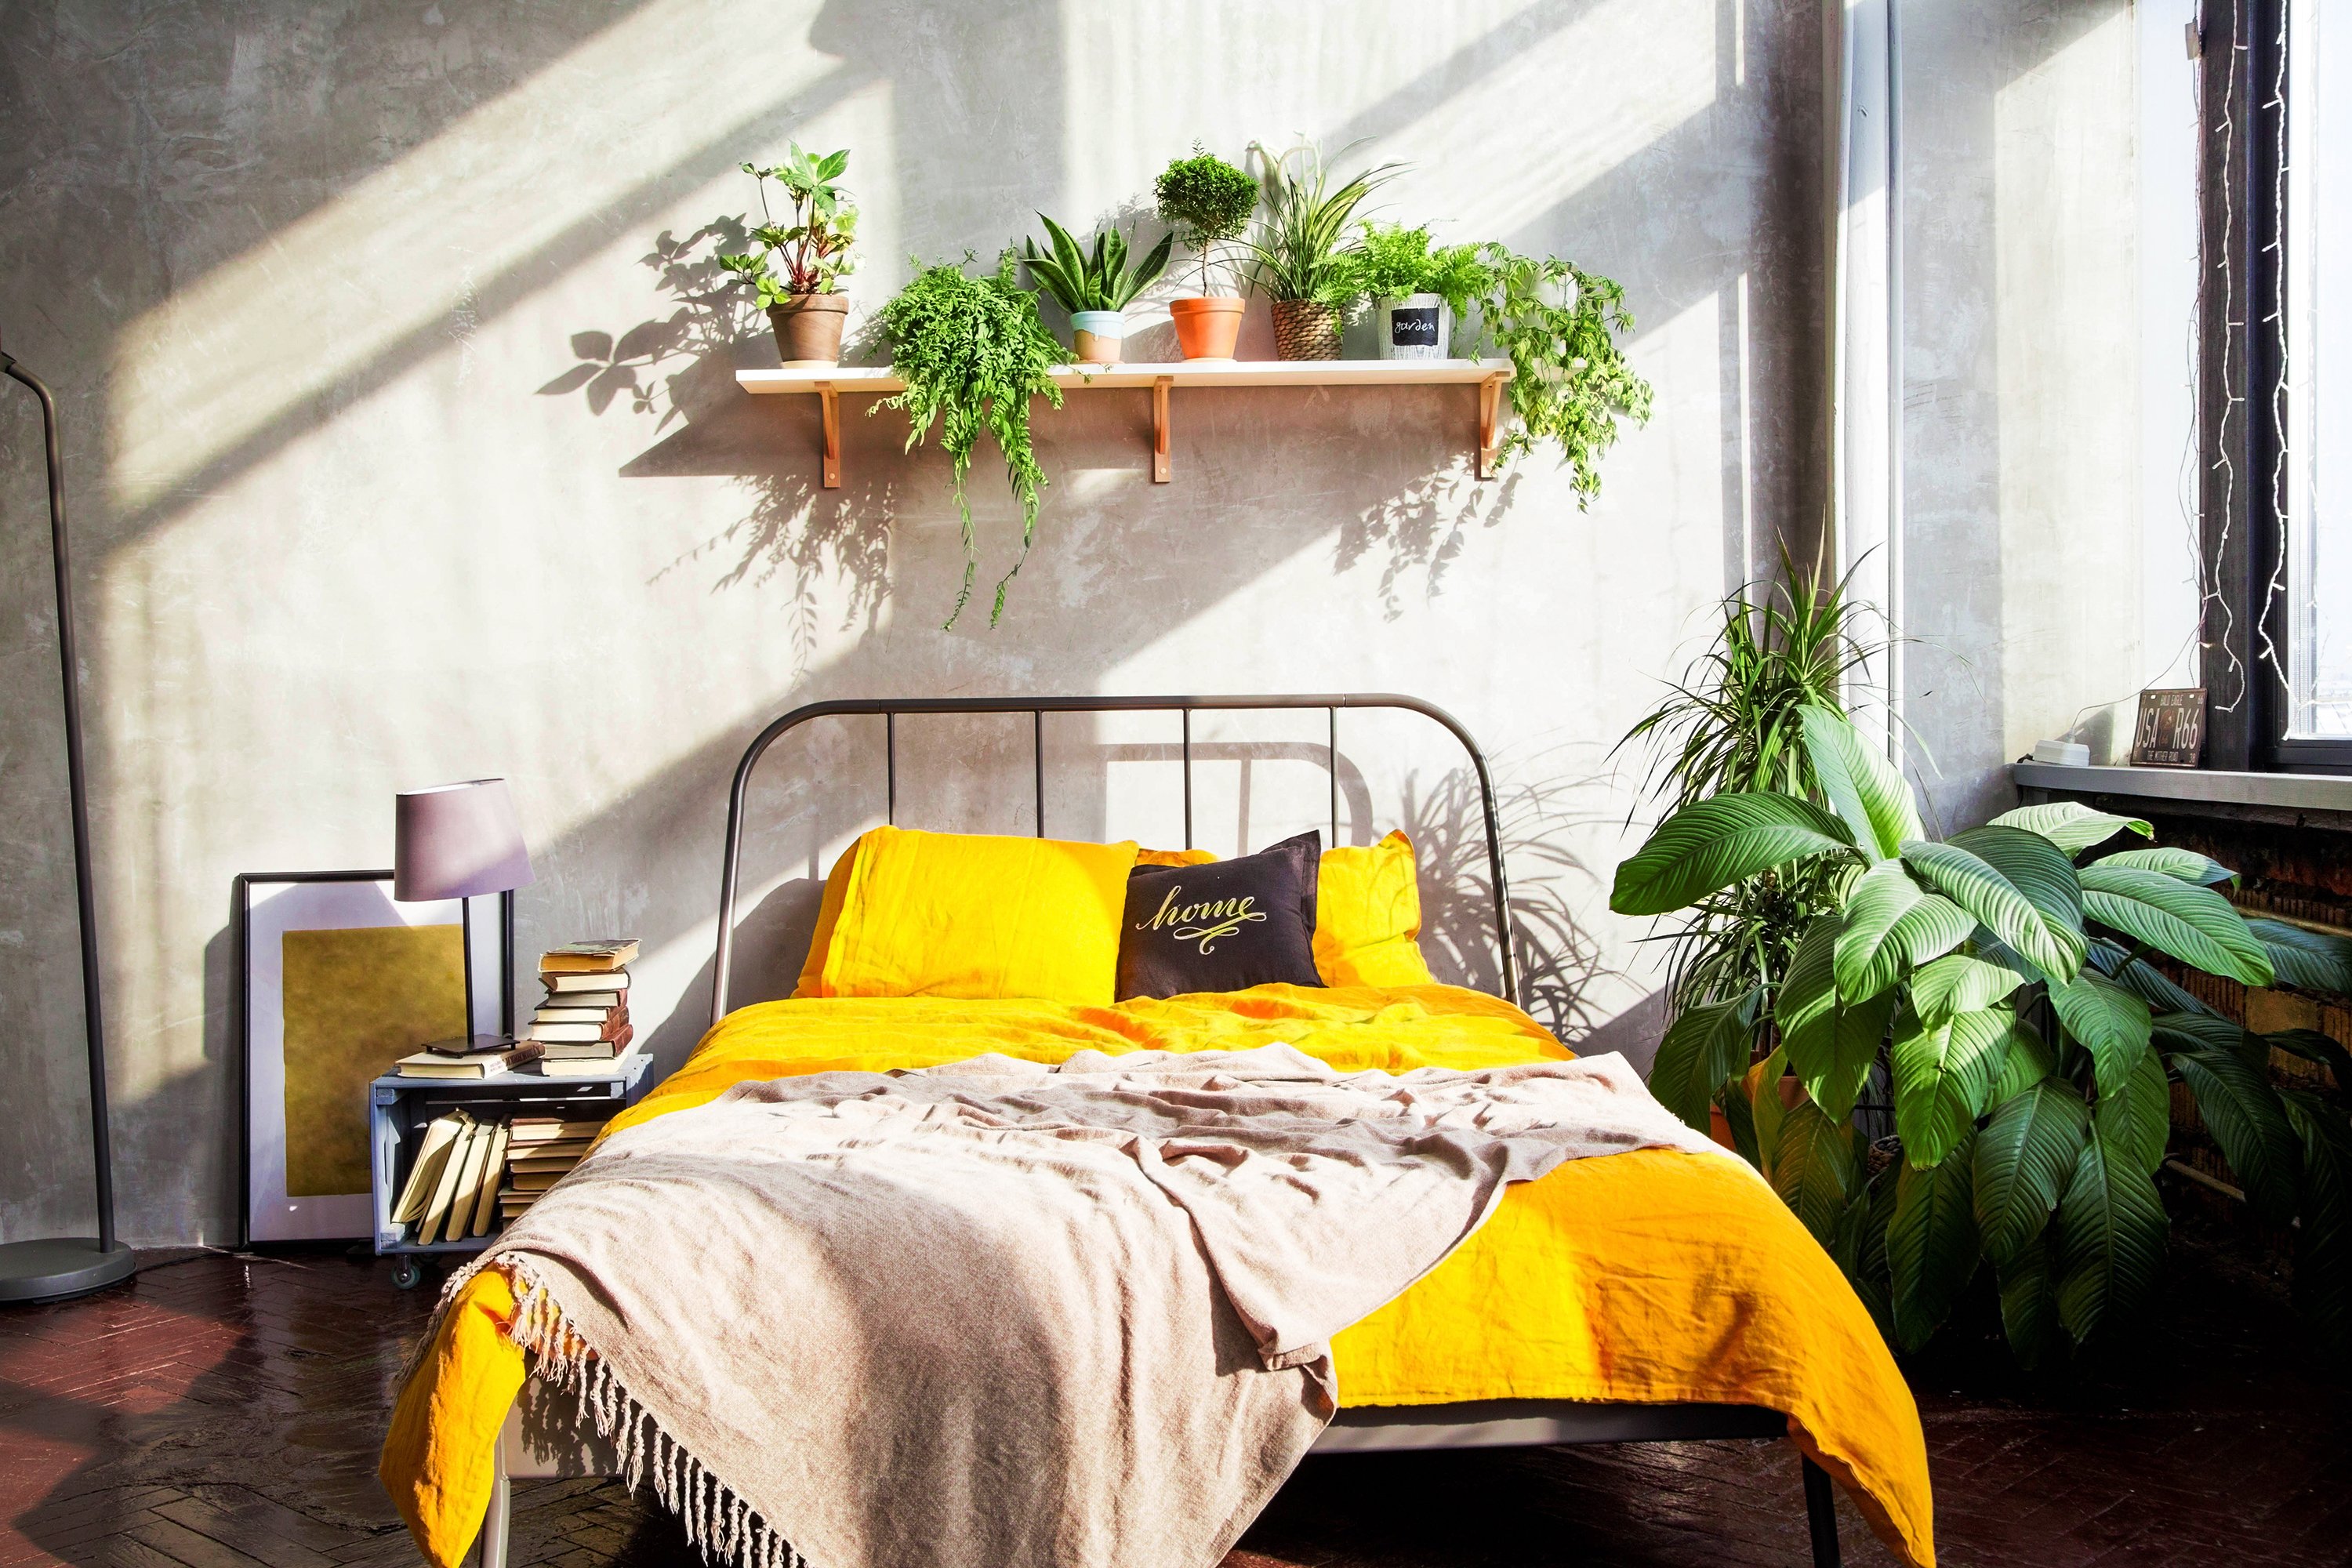 how to decorate my bedroom using plants